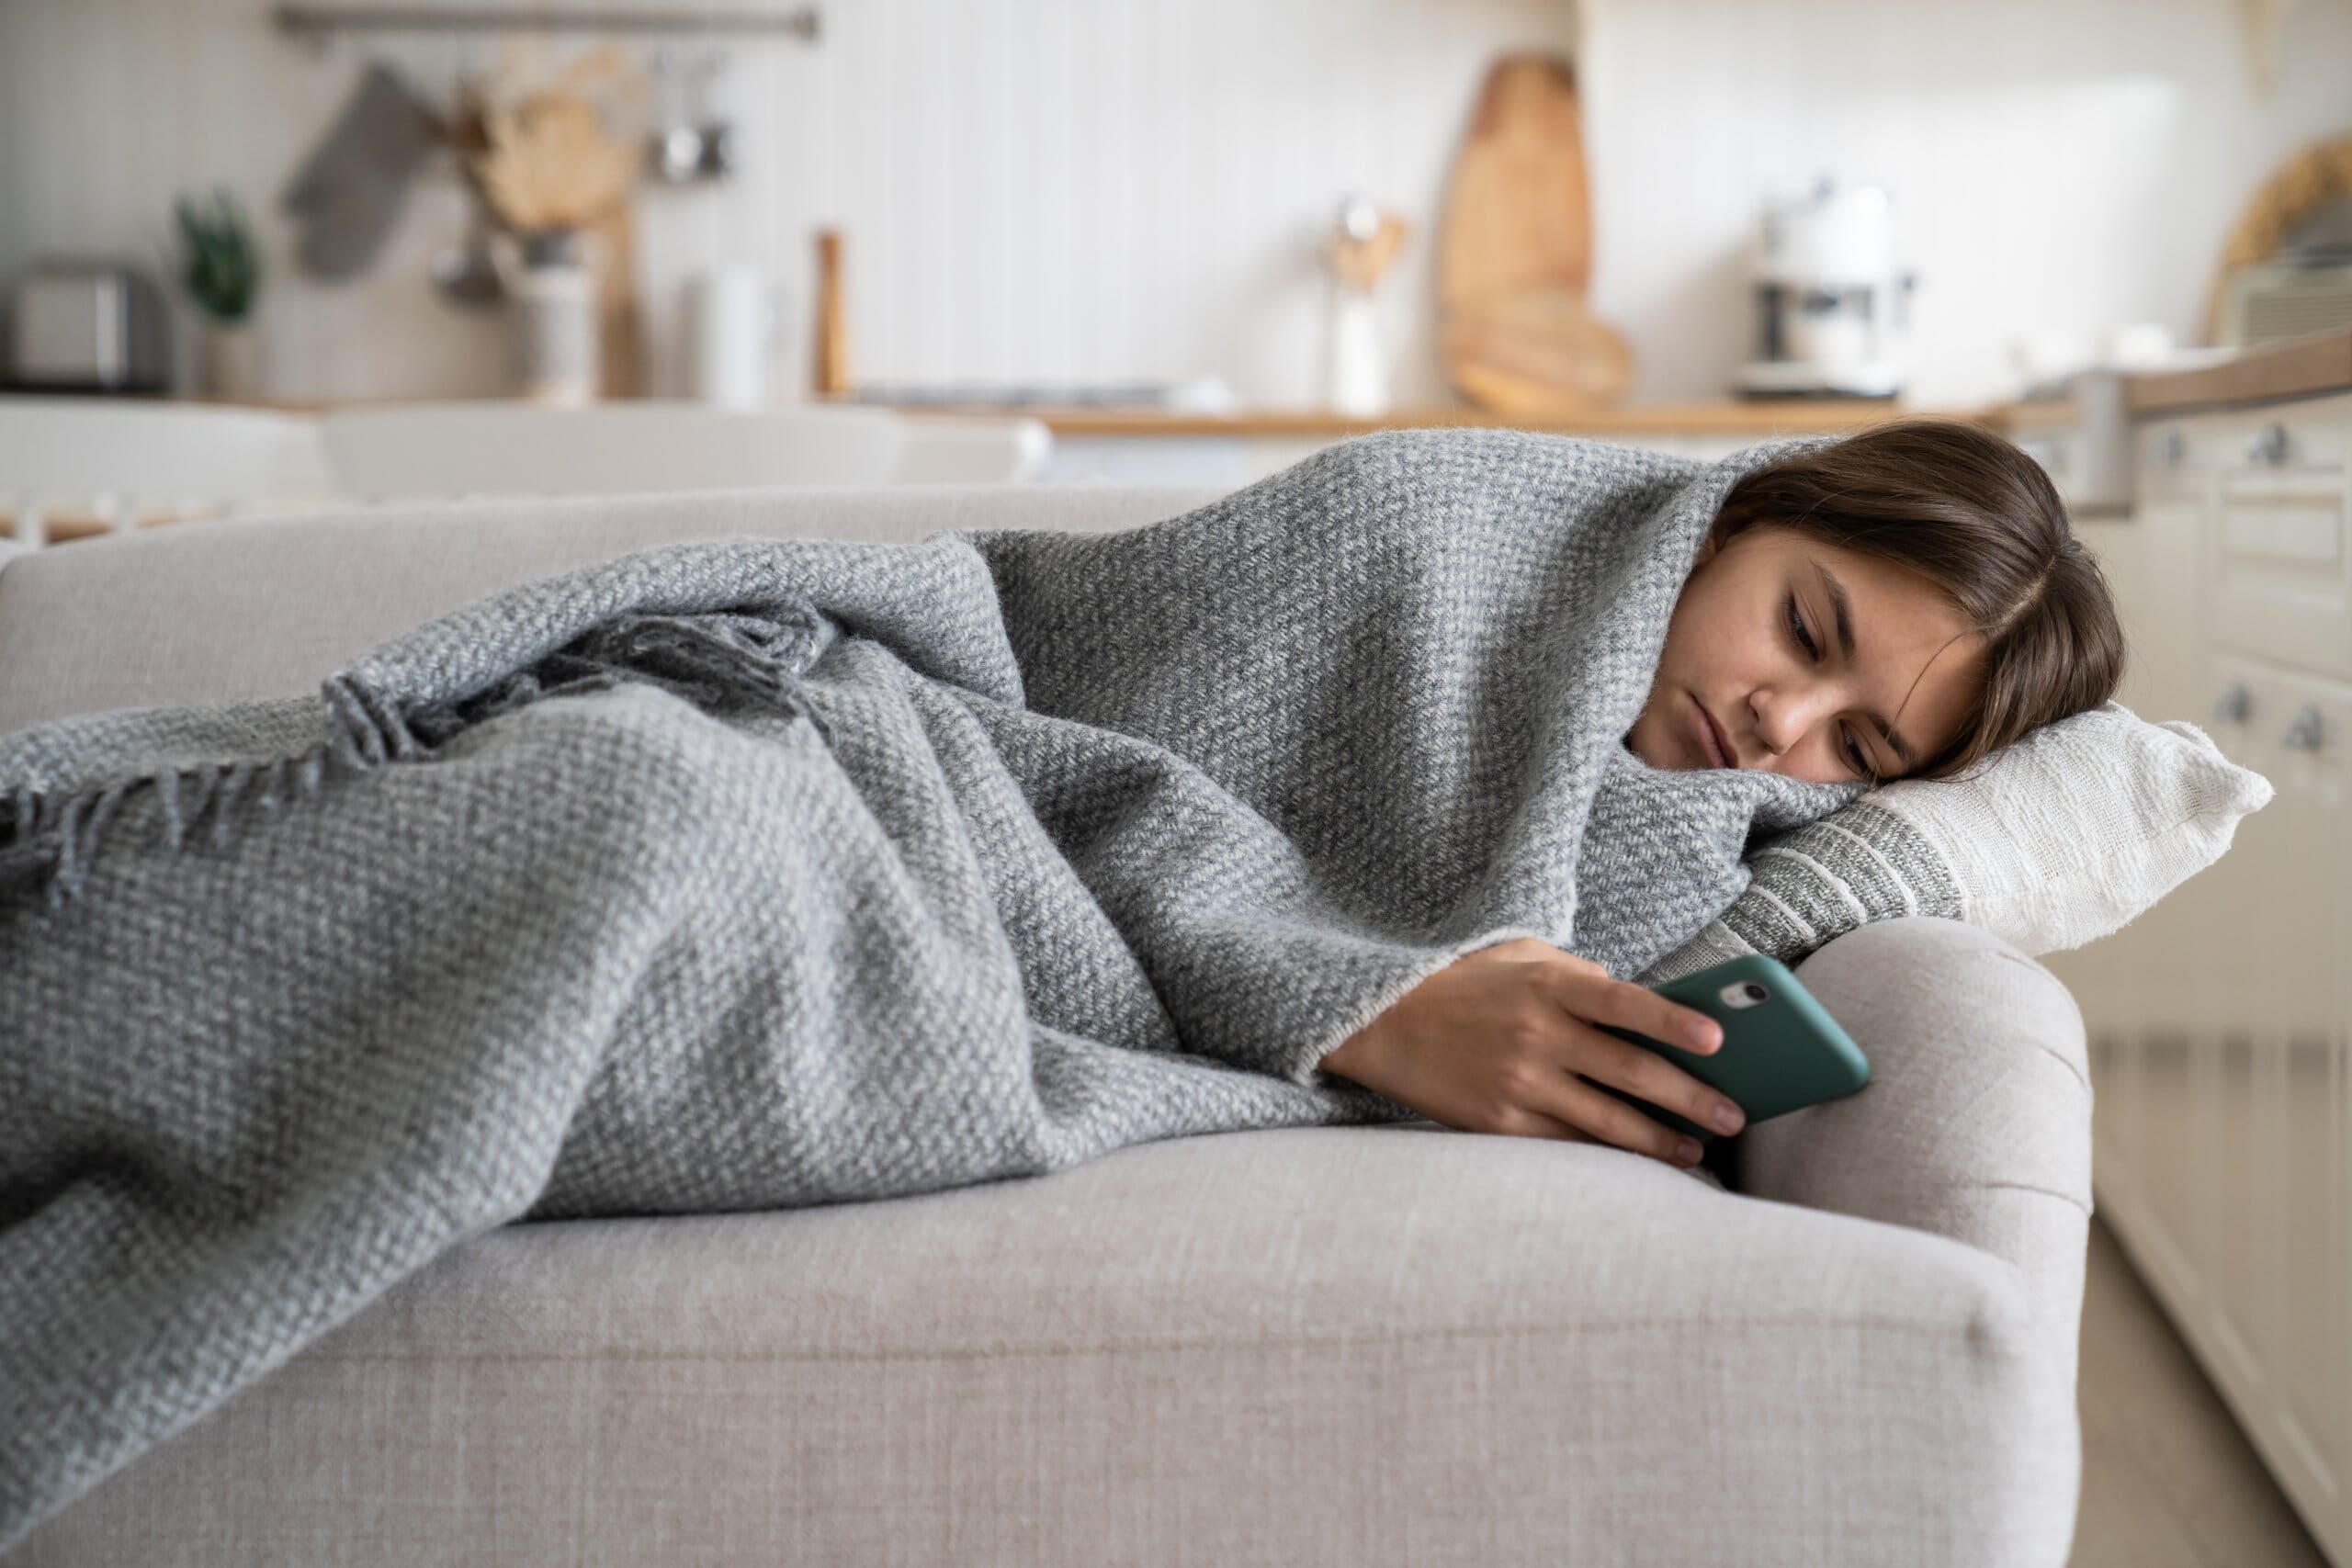 Girl looking depressed wrapped in a blanket on her phone on the sofa.